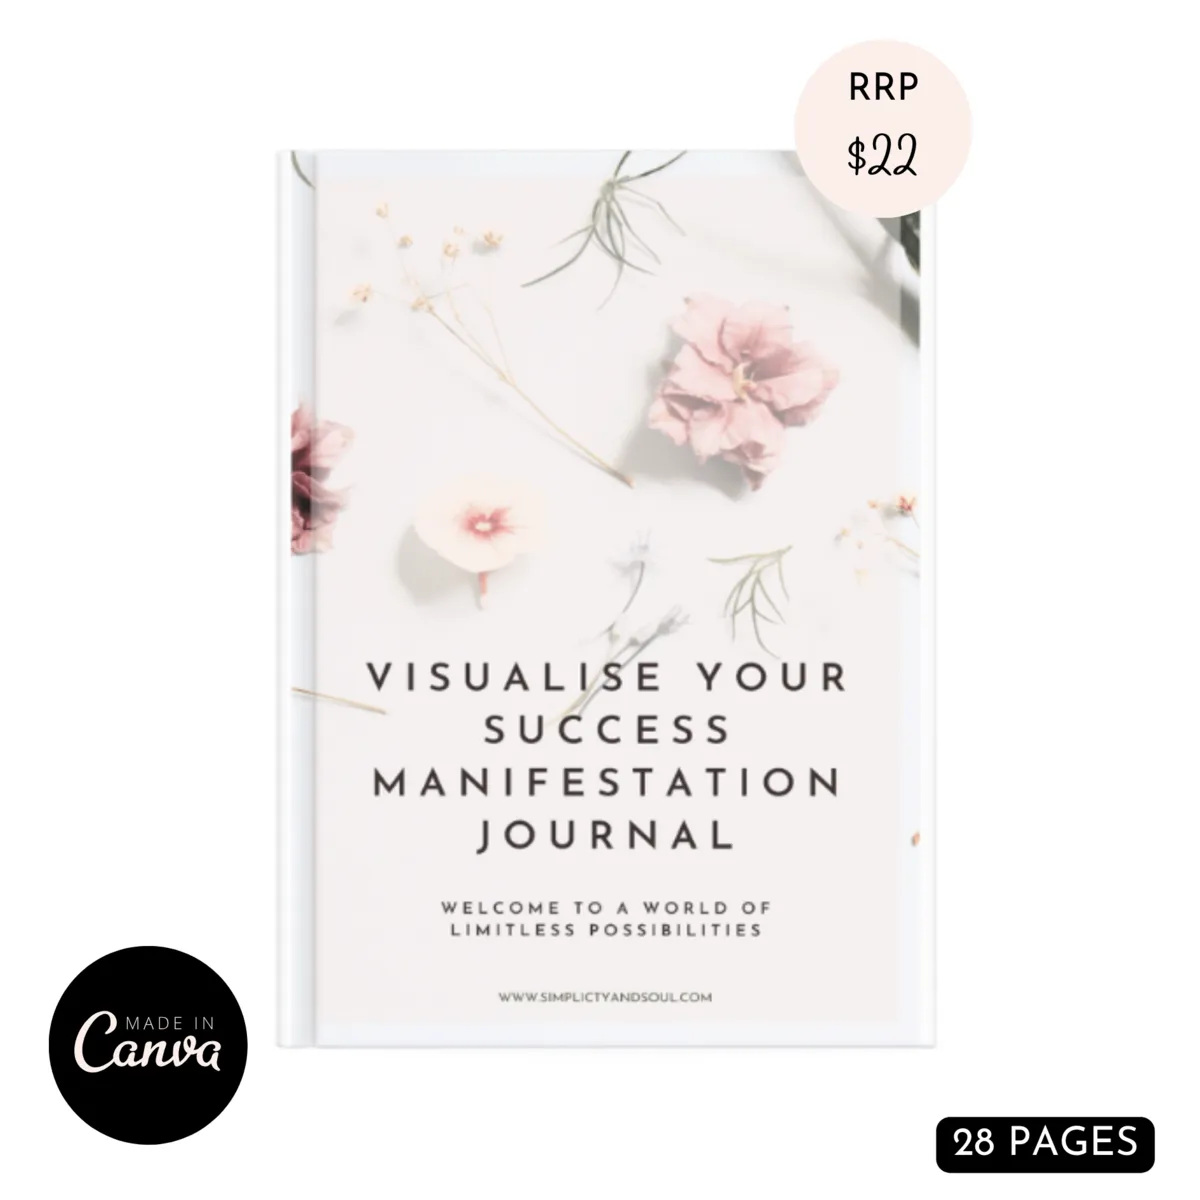 “Visualise Your Success Manifestation Journal" - 28 pages RE-SELLABLE RE-BRANDABLE CANVA TEMPLATE